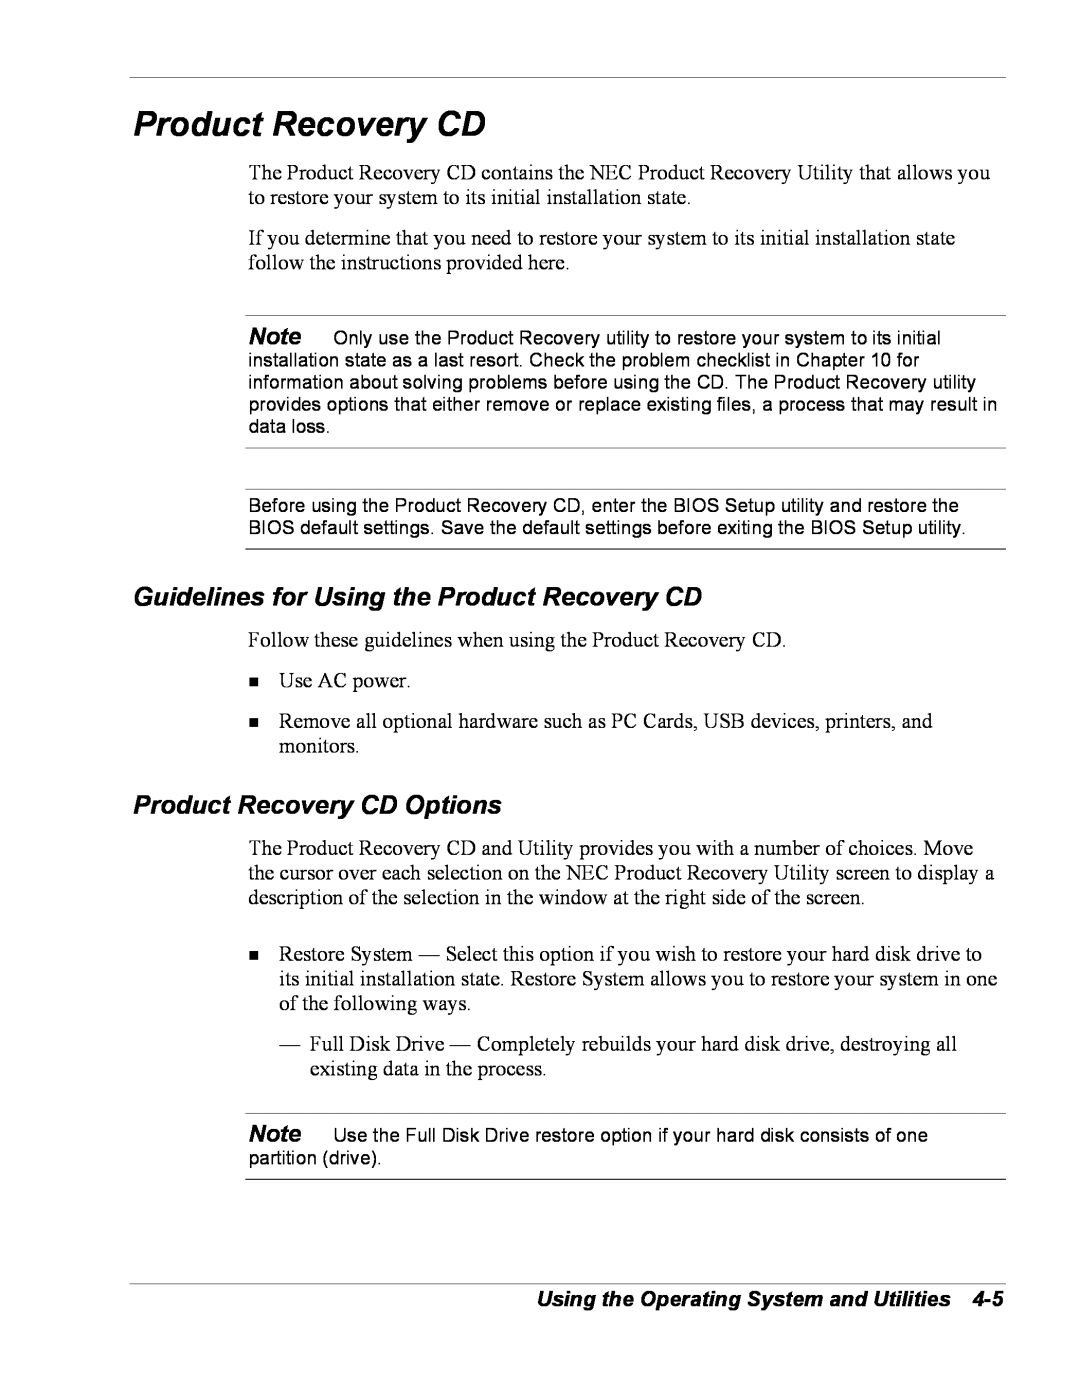 NEC Versa Series manual Guidelines for Using the Product Recovery CD, Product Recovery CD Options 